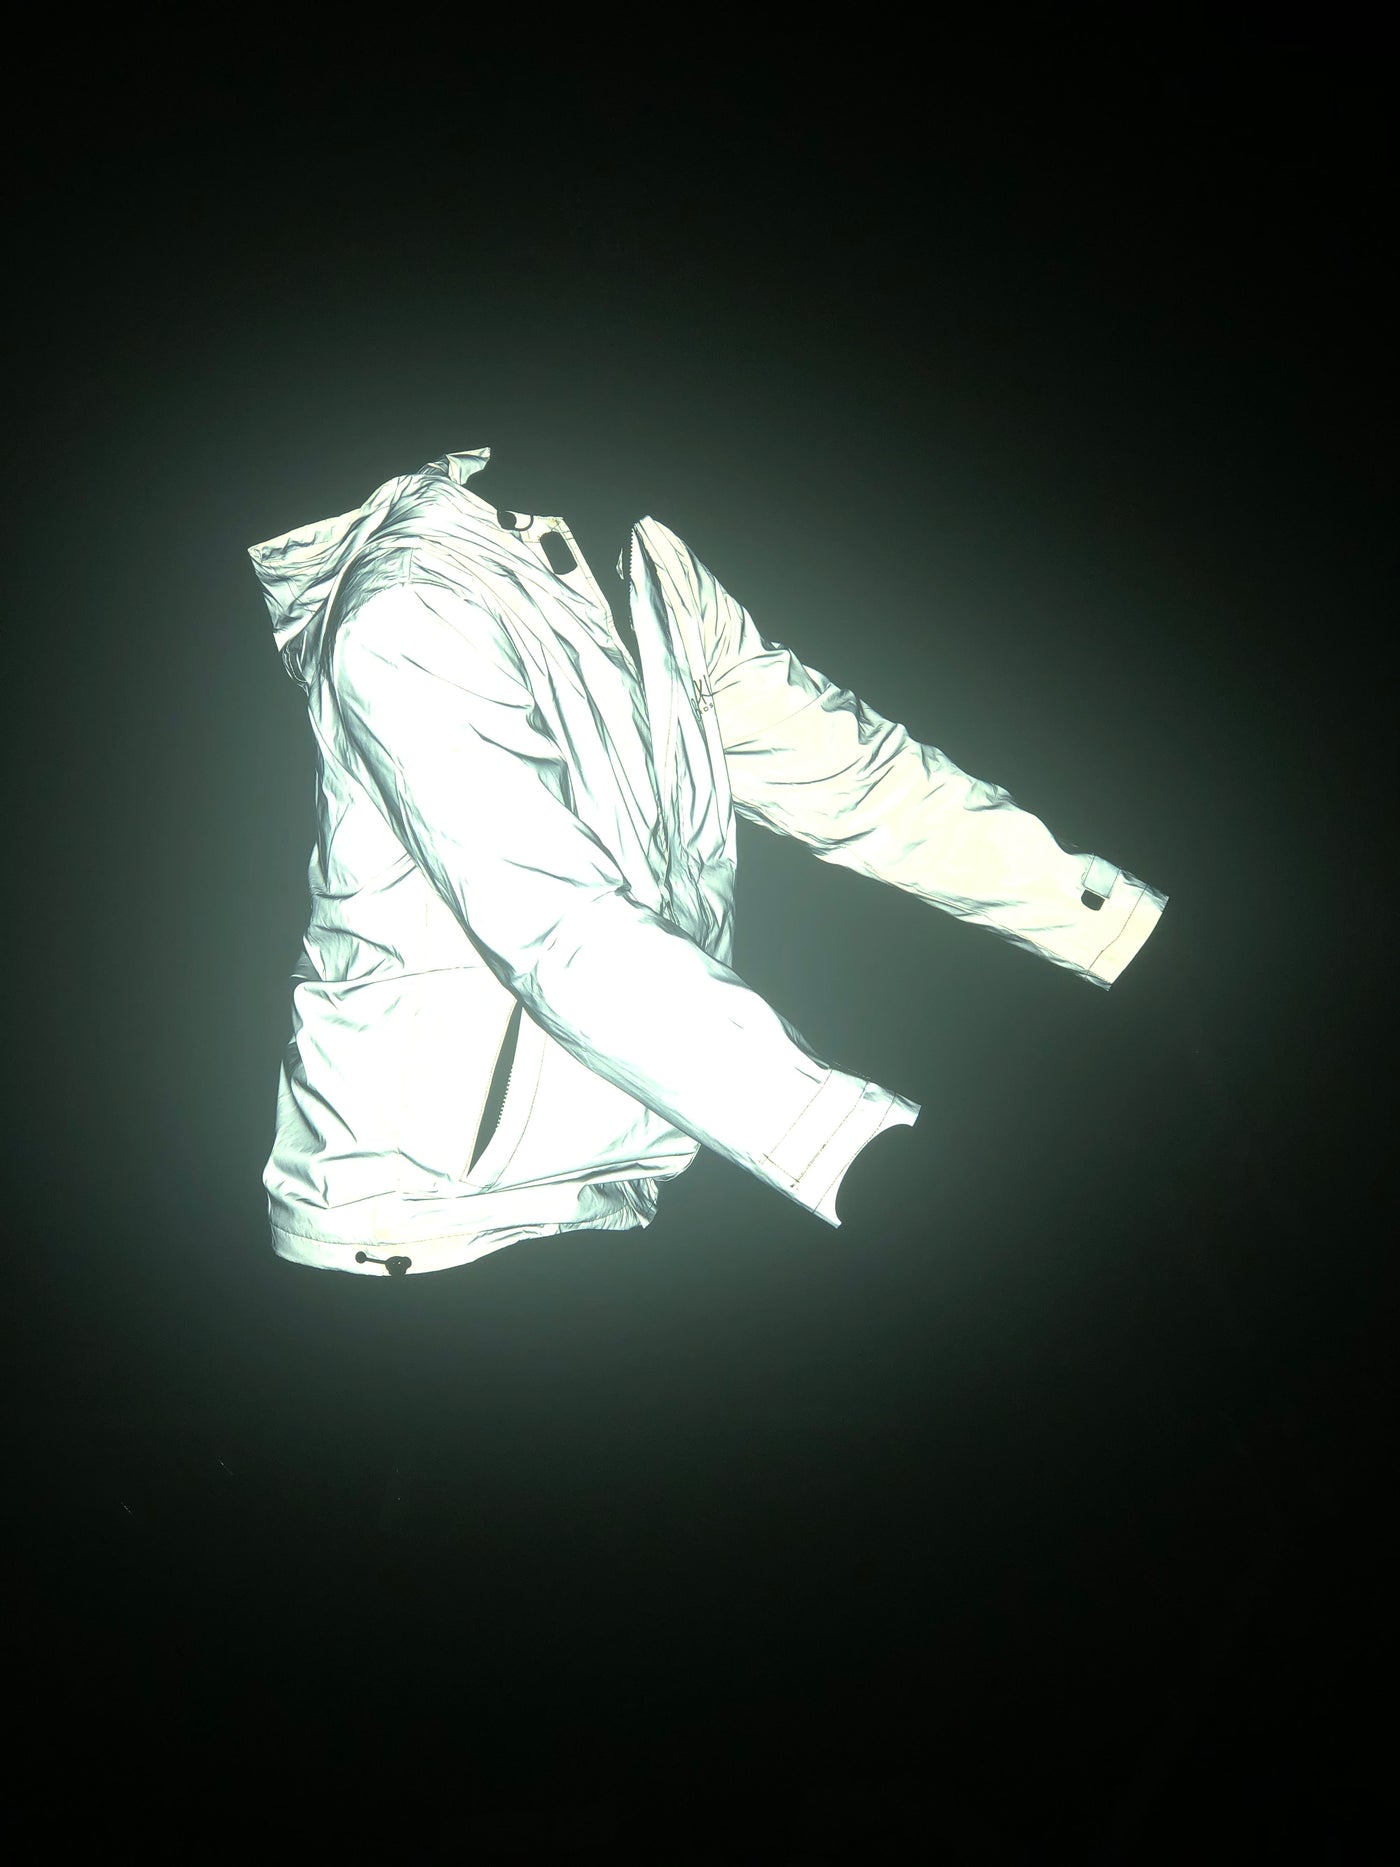 Riding a bike in the dark with a reflective jacket